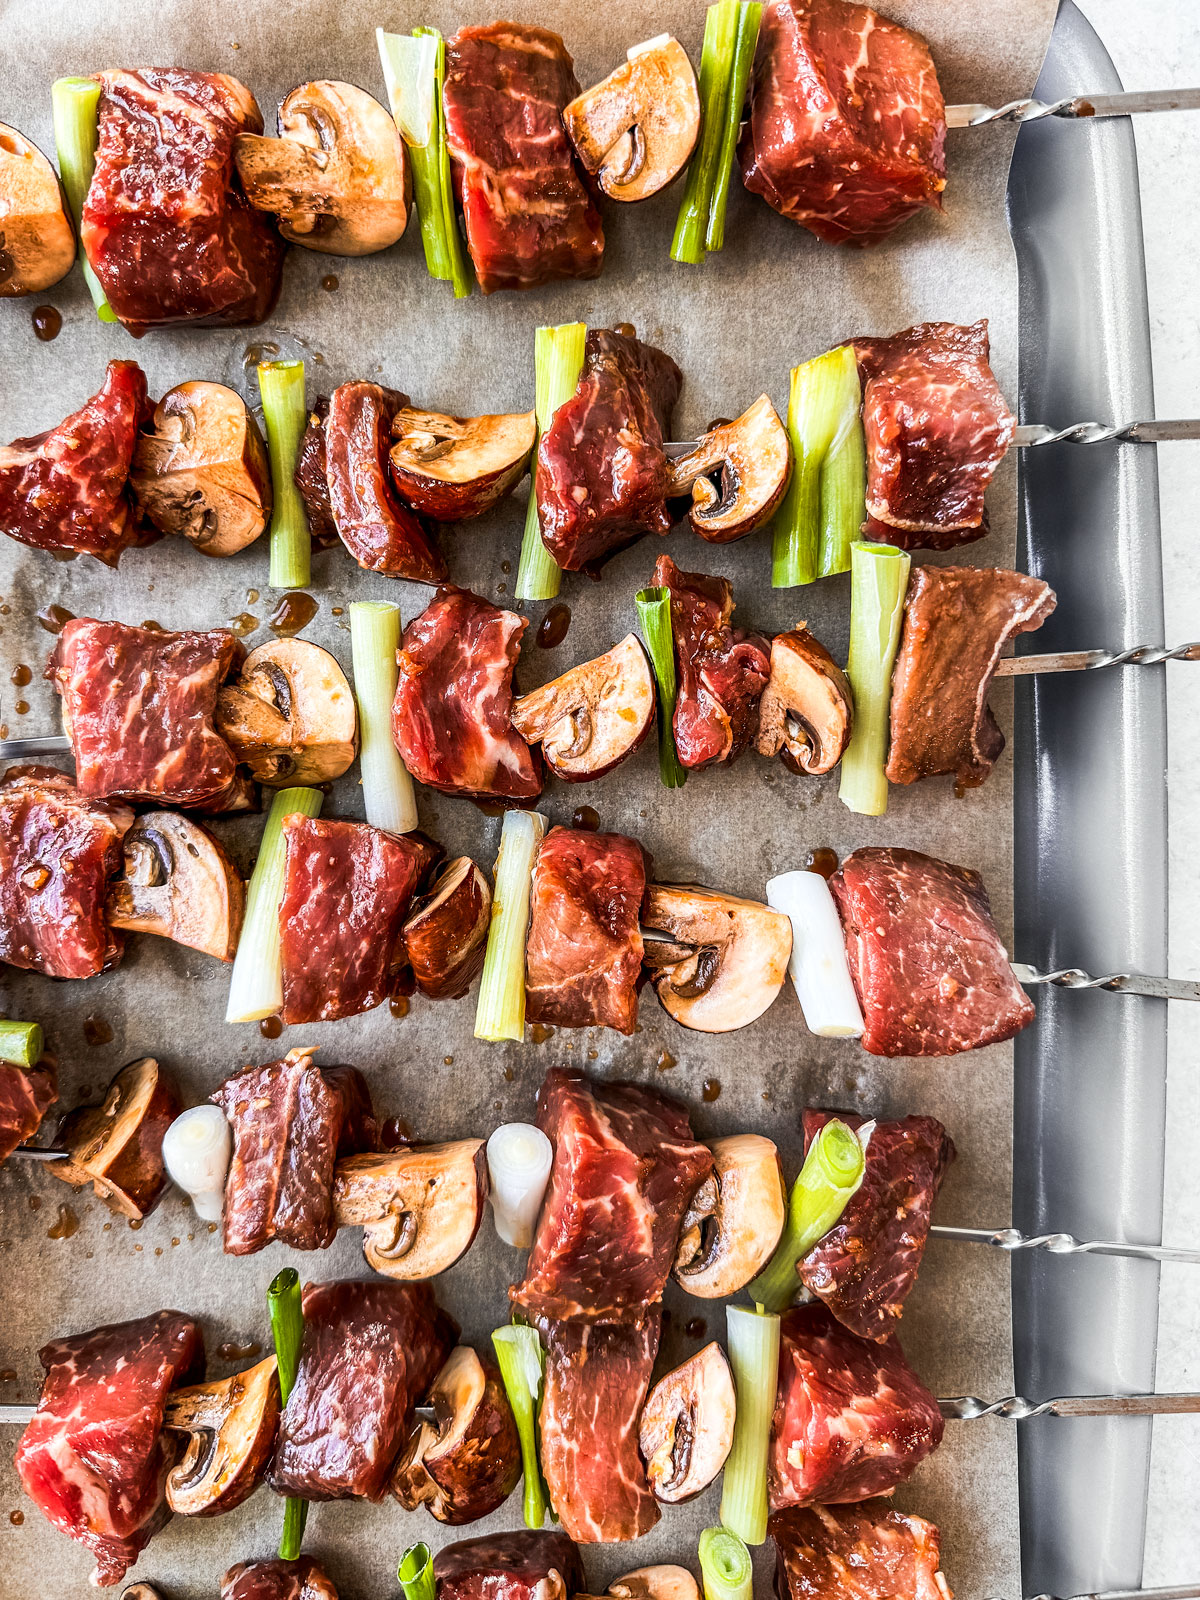 Uncooked beef, mushrooms, and scallions threaded onto metal skewers.